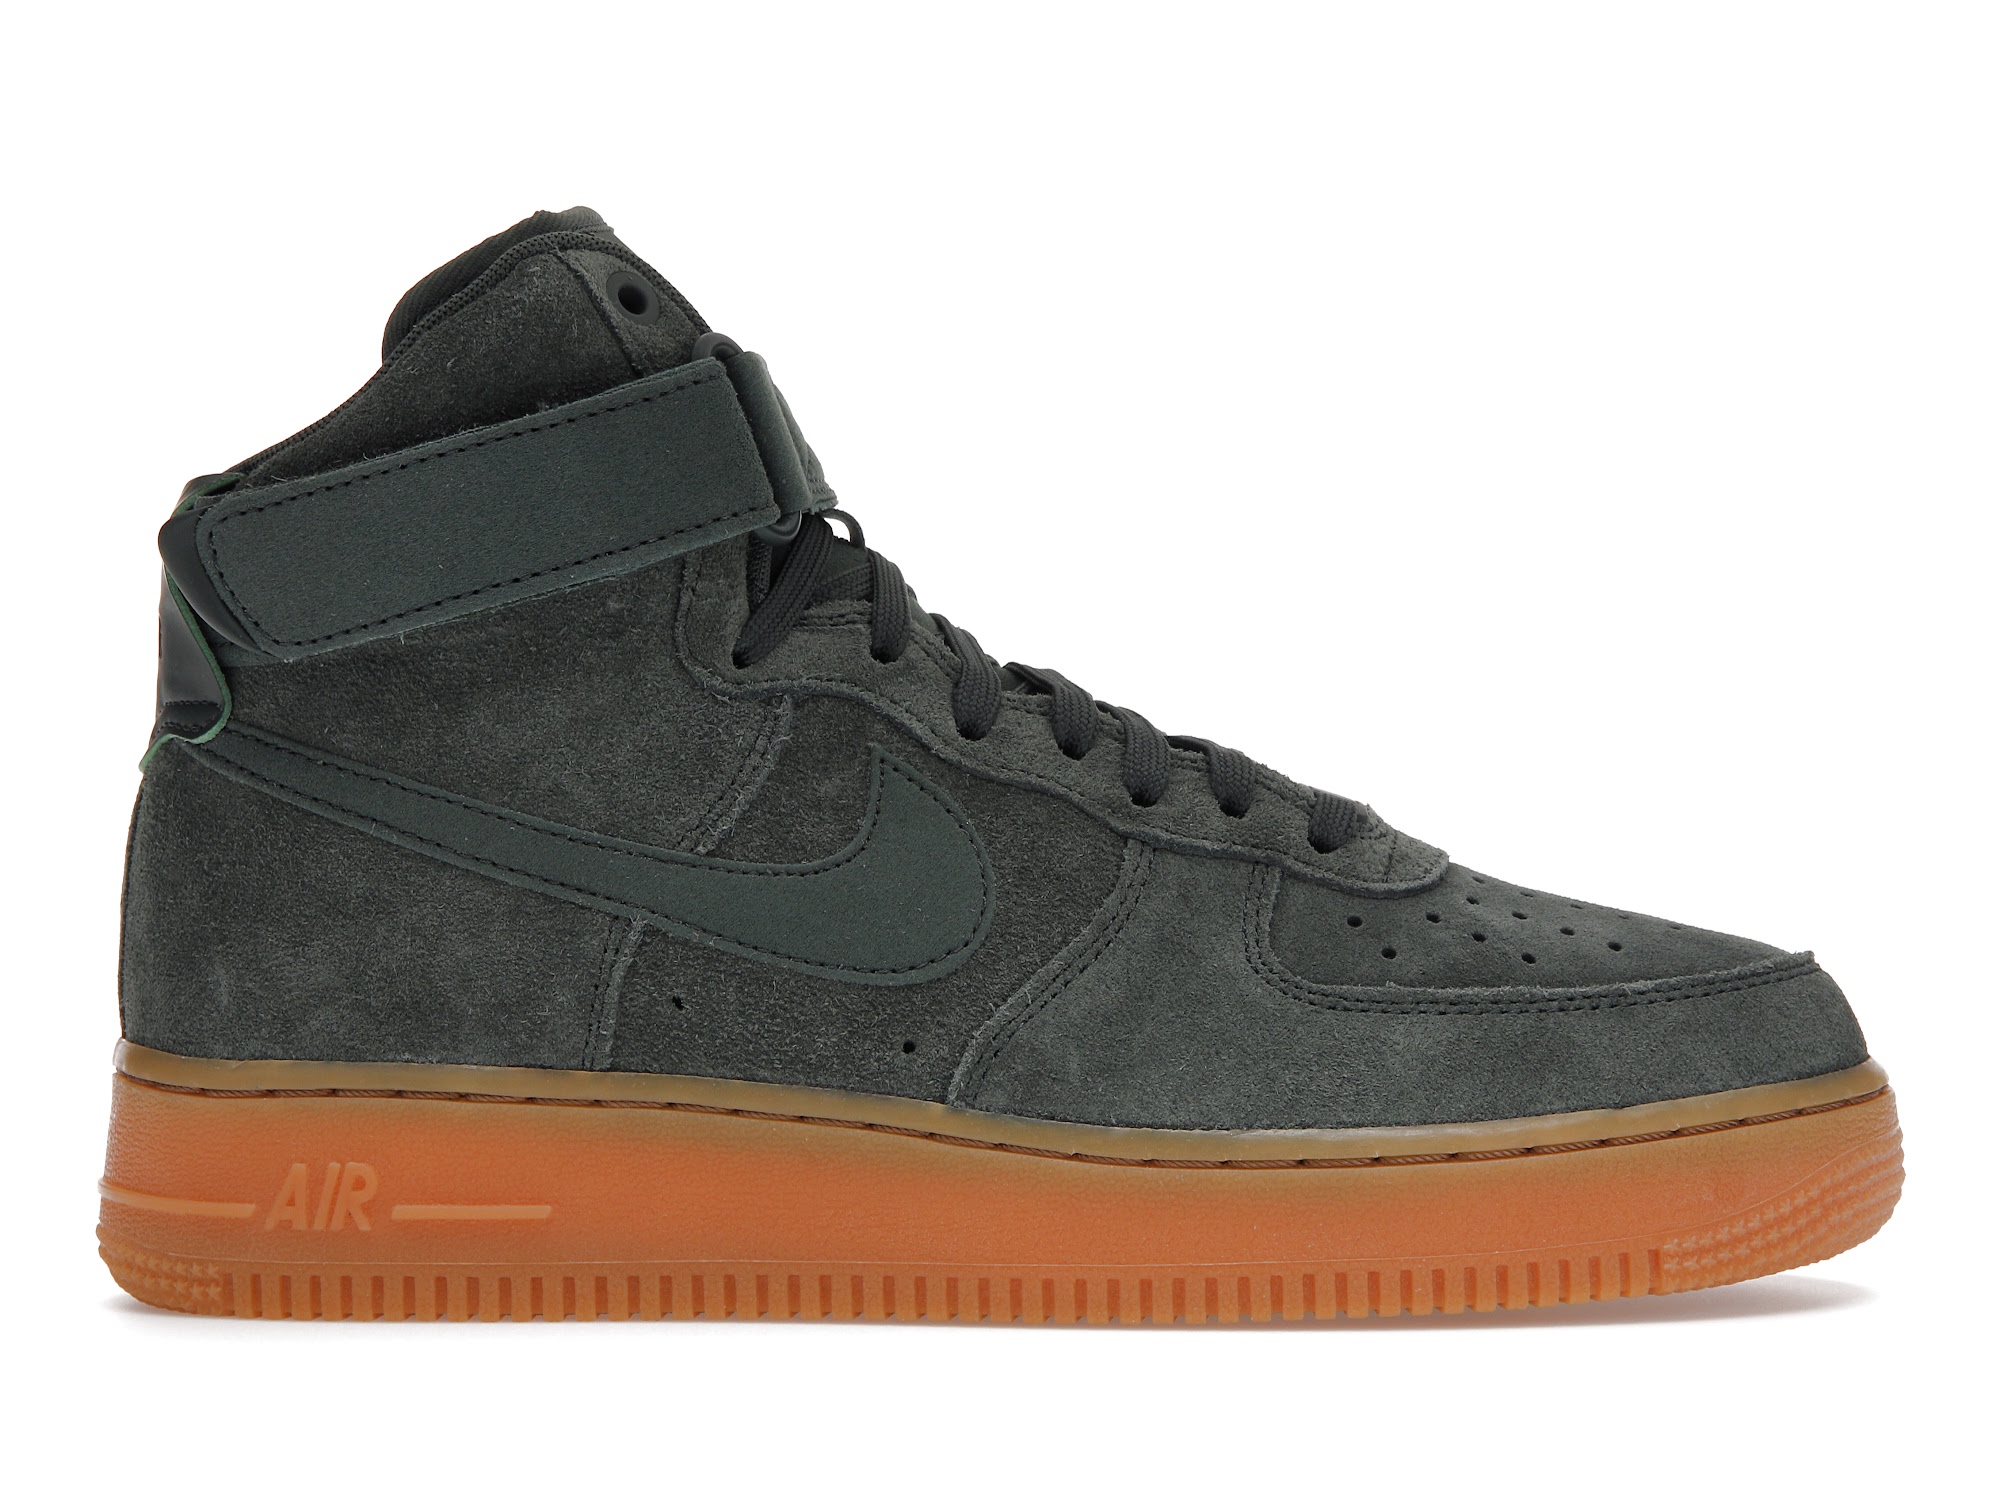 Nike Air Force 1 High '07 LV8 Suede Vintage Green Men's - AA1118 